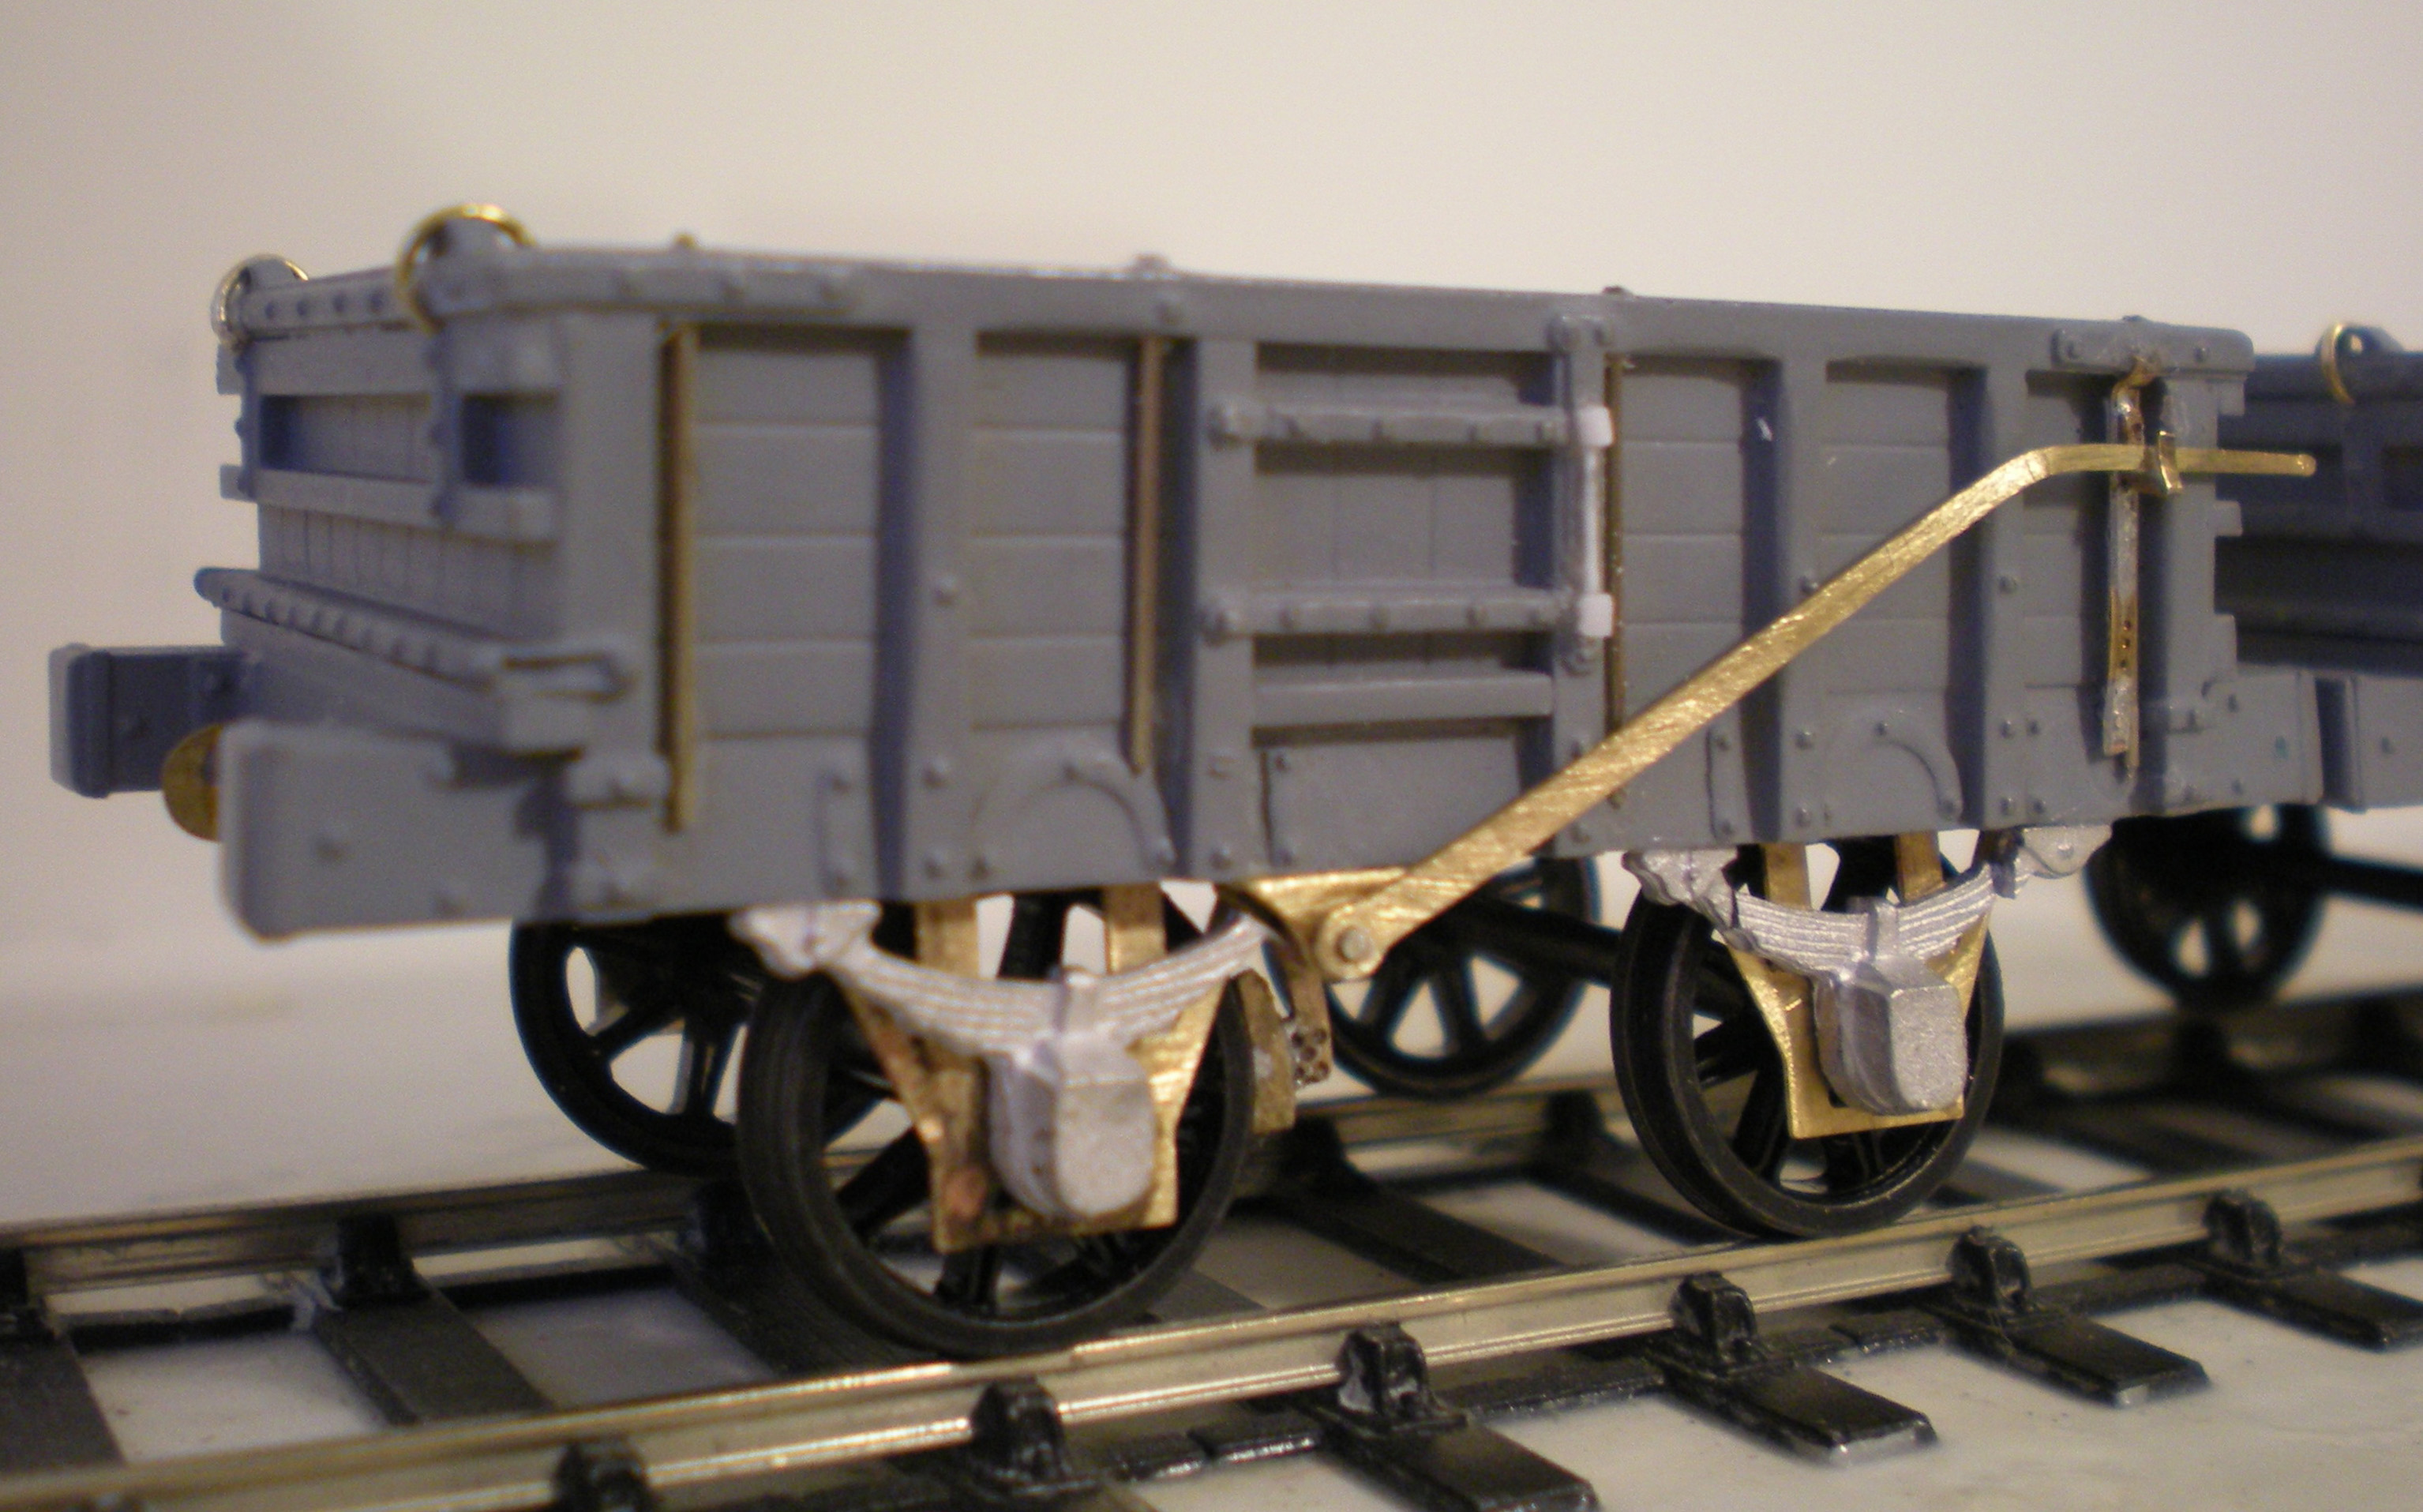 A test build of the kit, unpainted, showing the characteristic end door